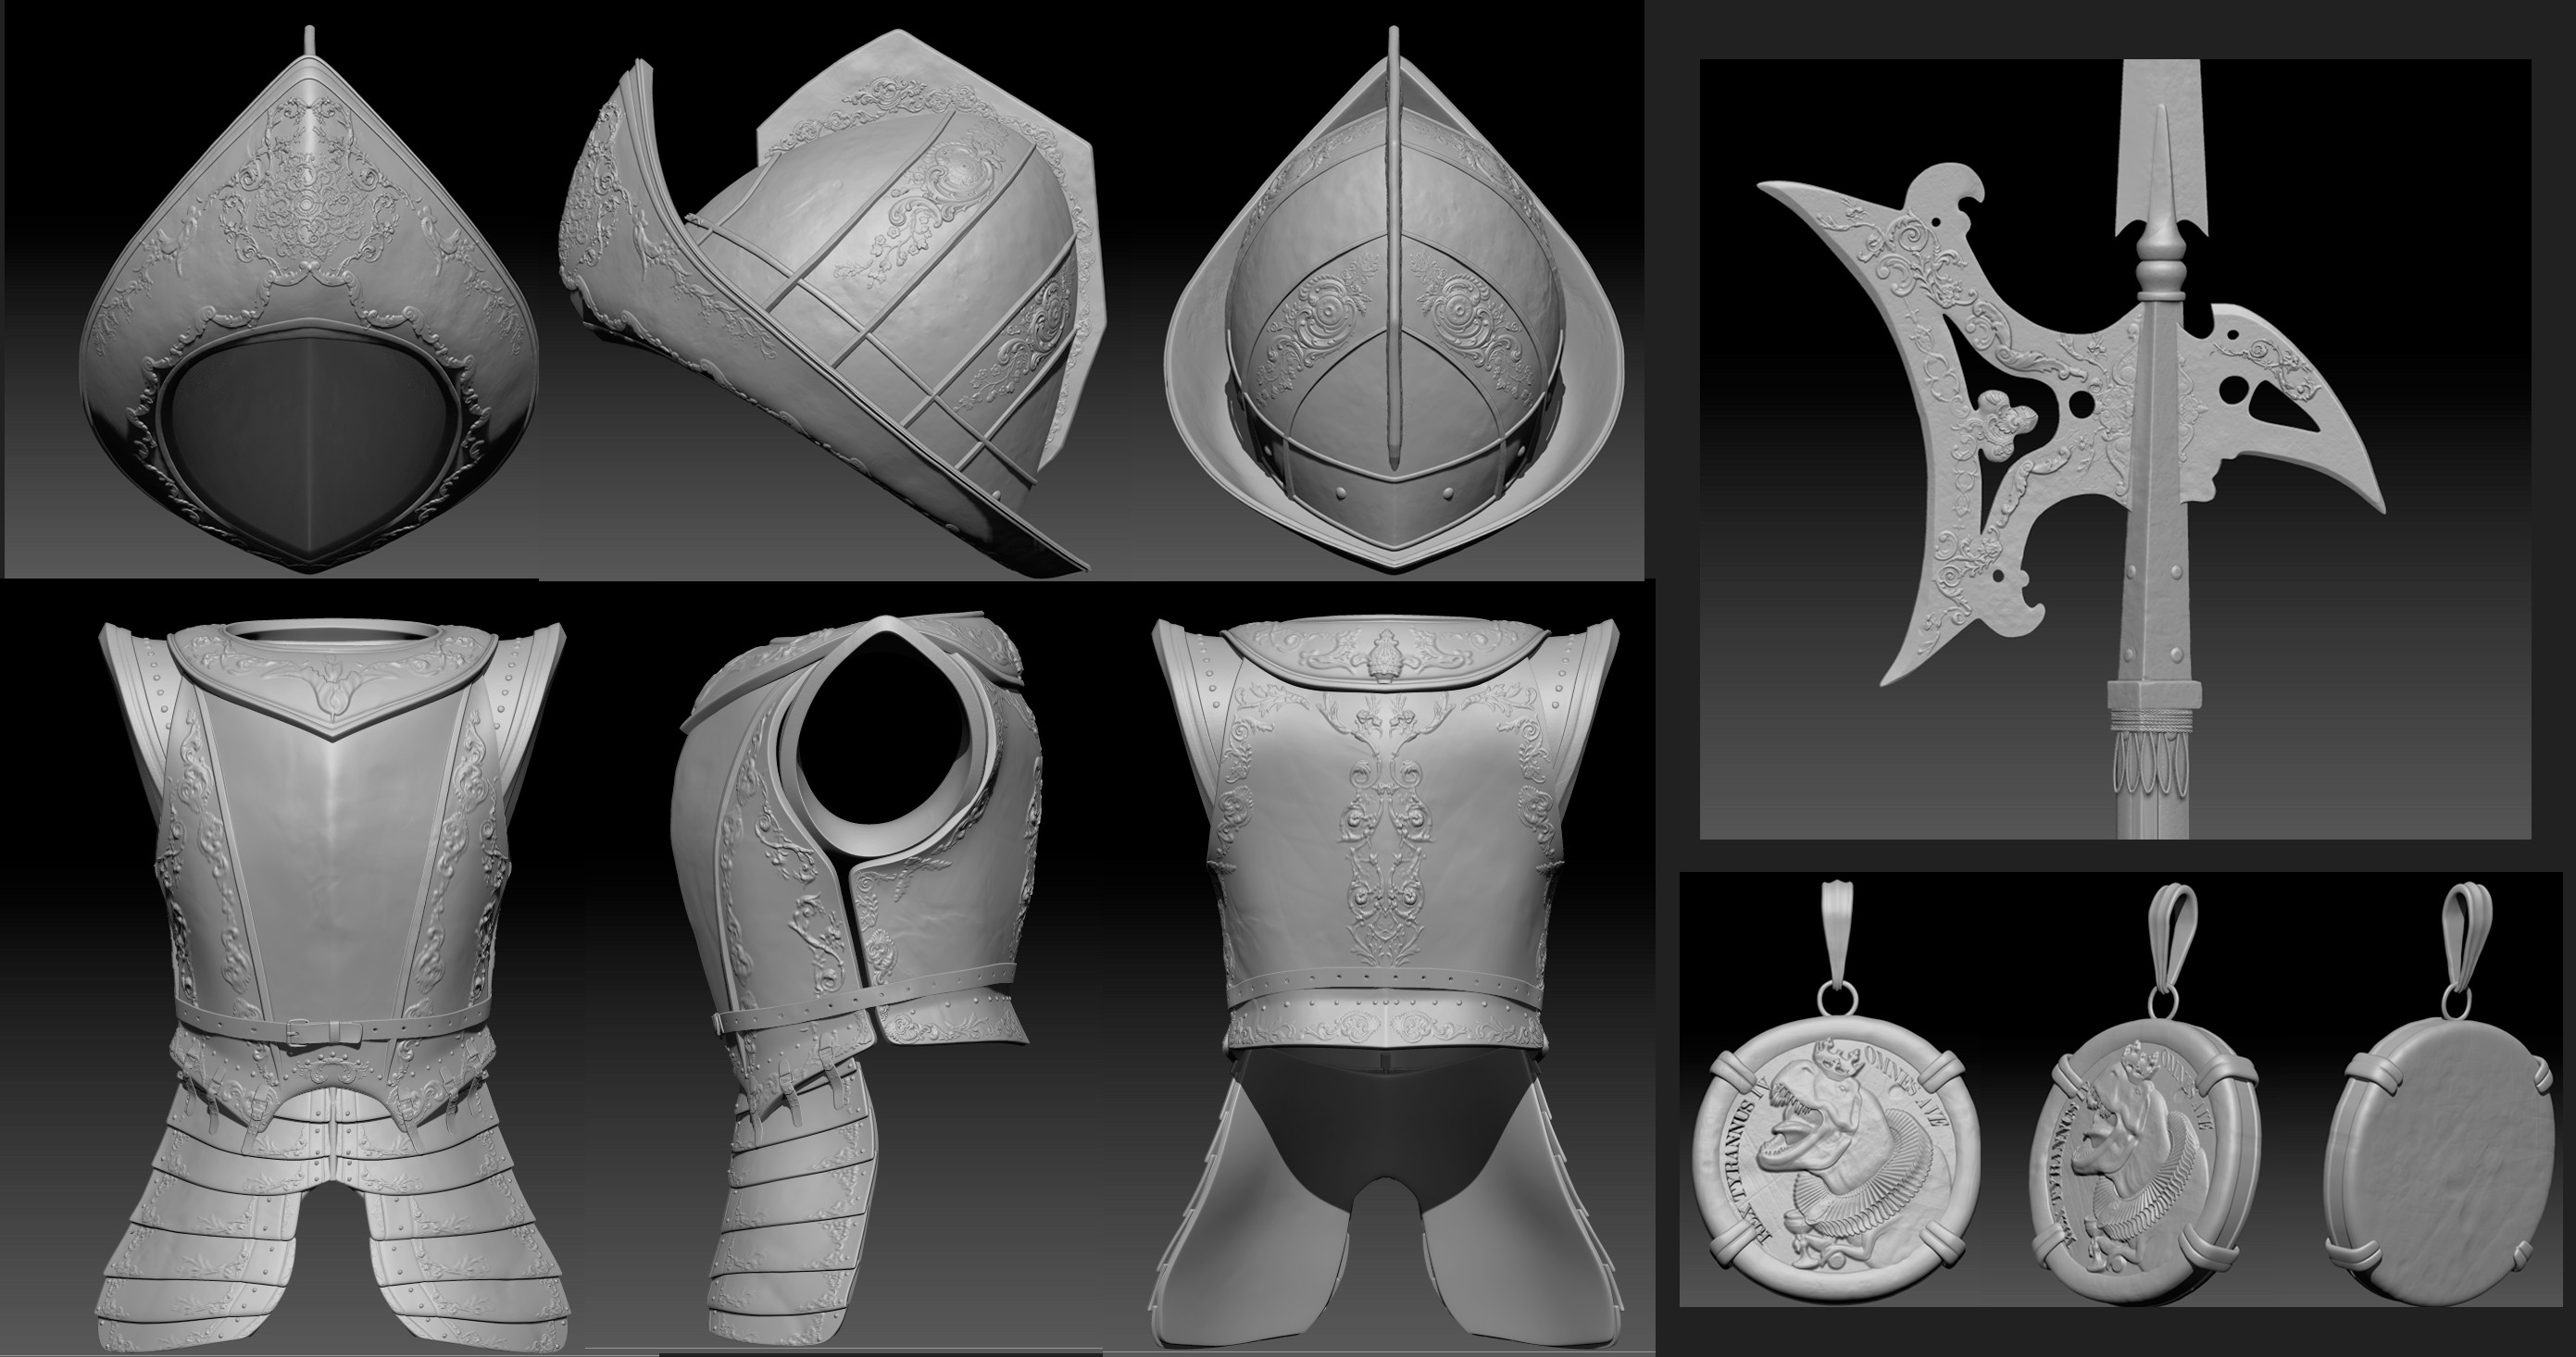 Sculpt of helmet, halberd, armor, and medallion.  Medallion image was generated in Zbrush using Basrelief feature.